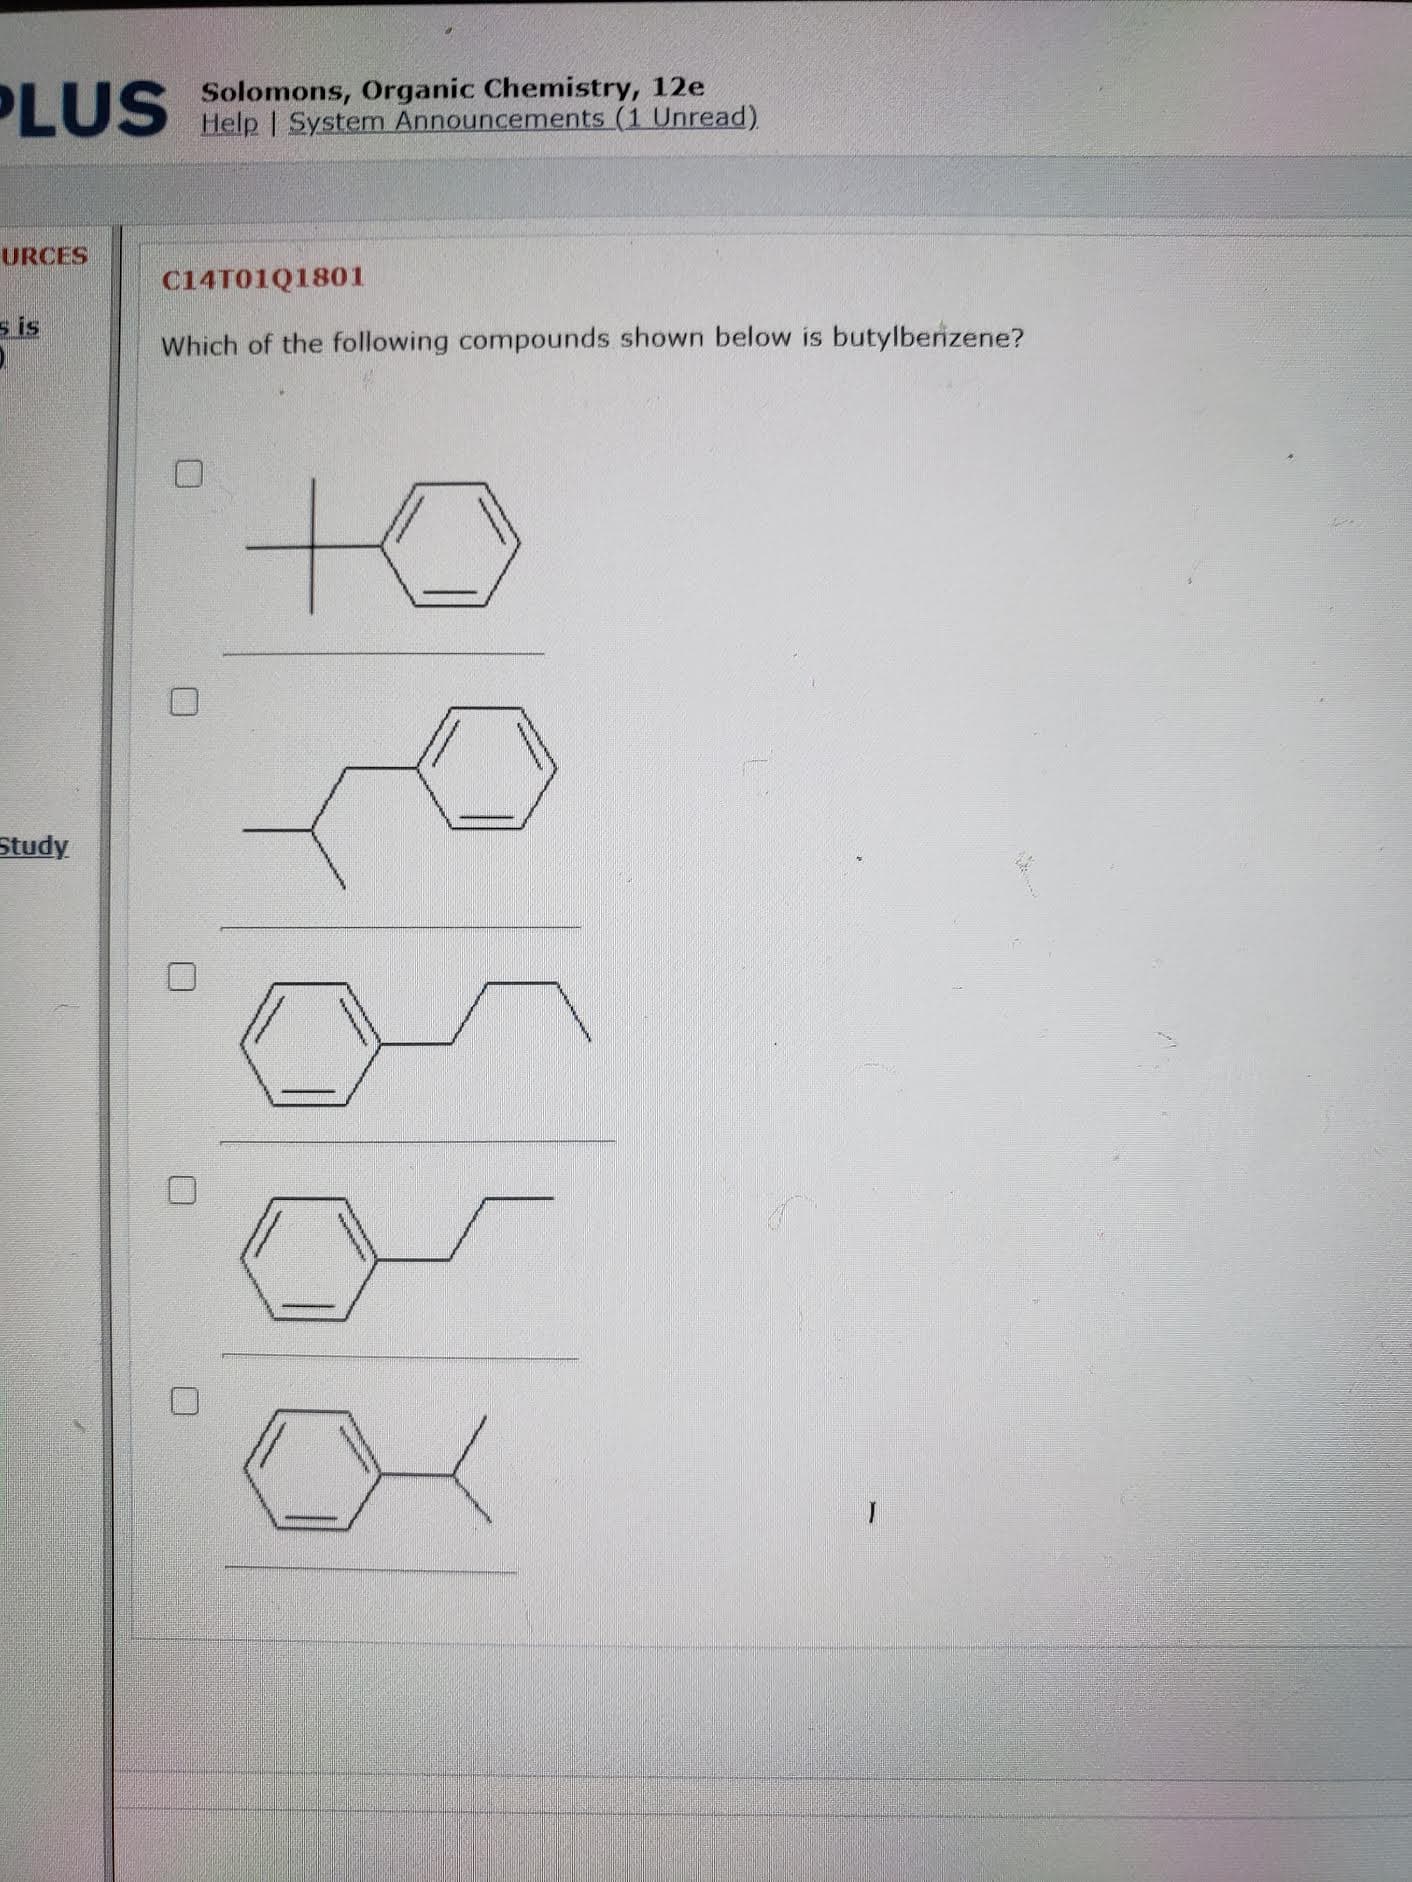 Which of the following compounds shown below is butylberizene?
to
